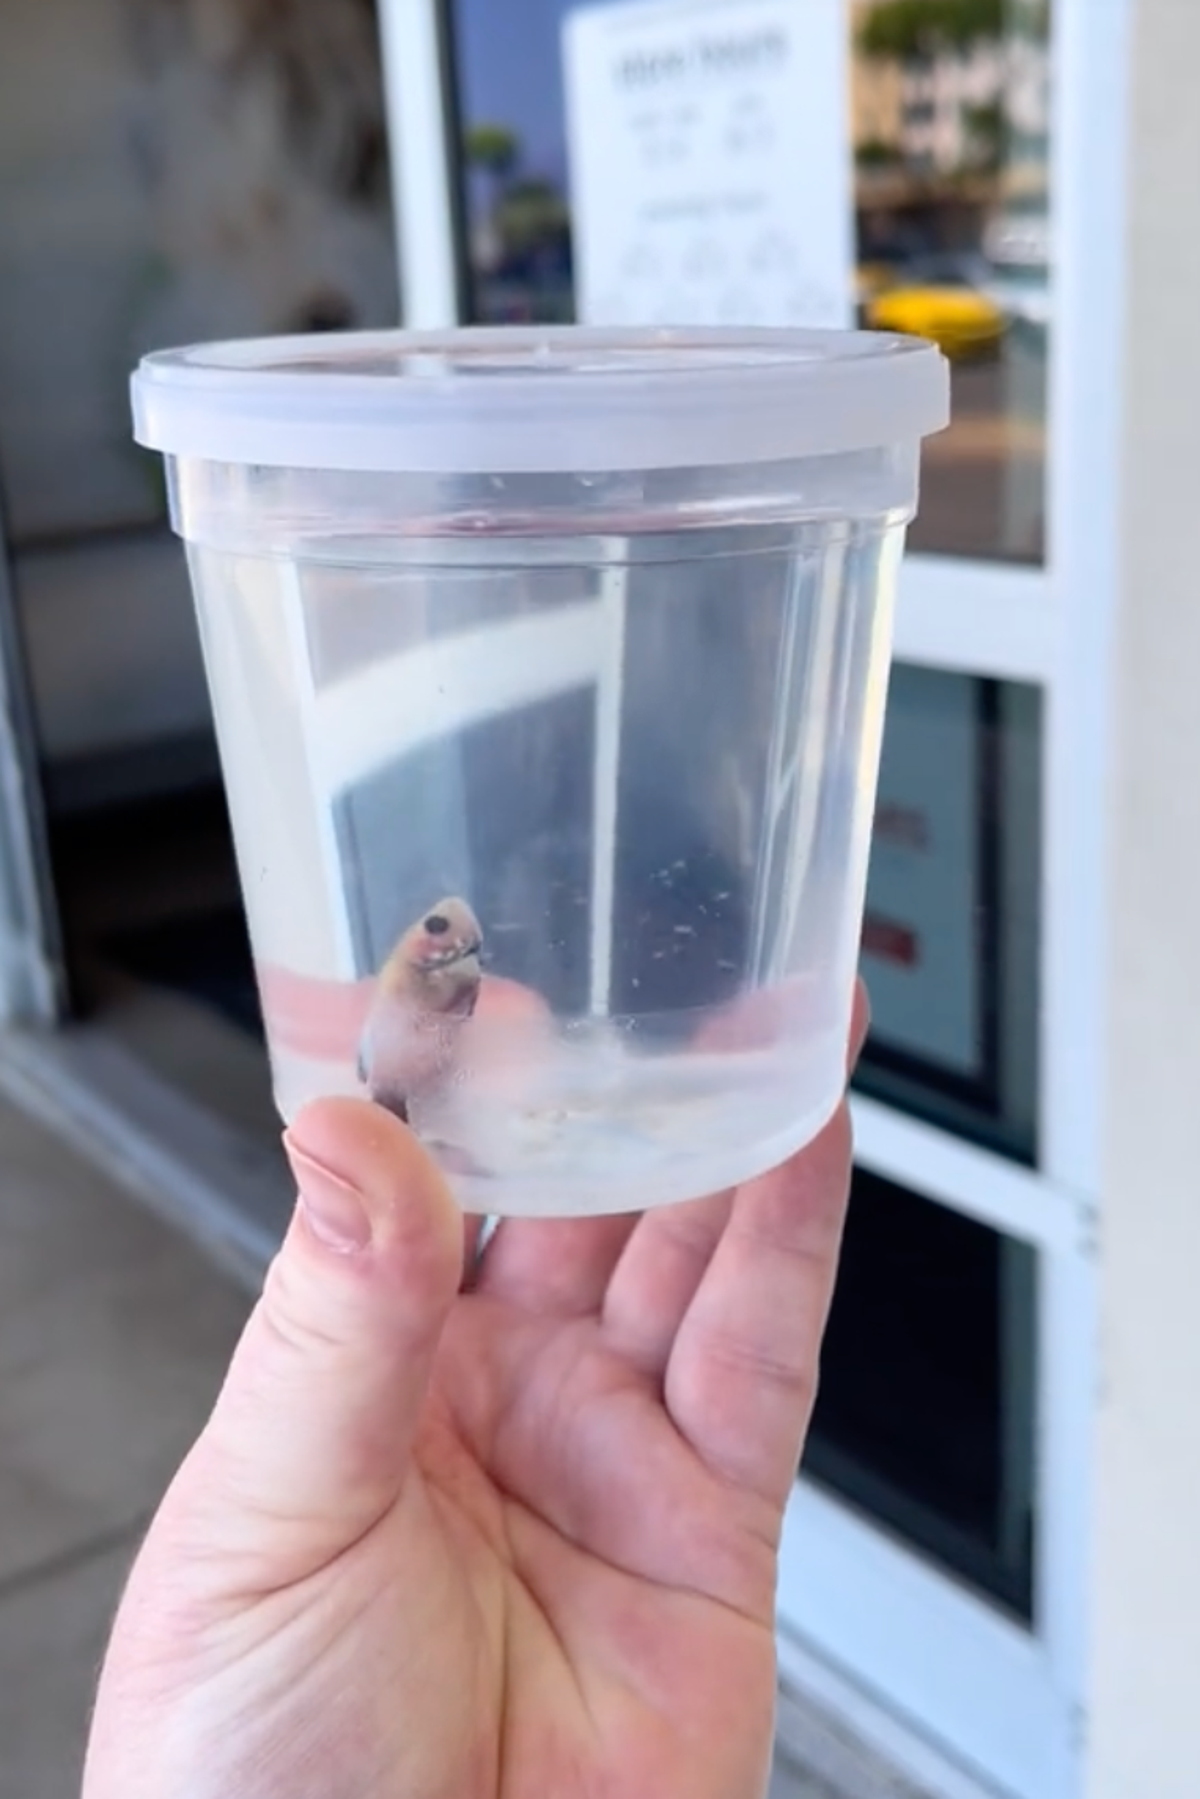 Woman claims PetSmart gave her fish for free 'to try and save him